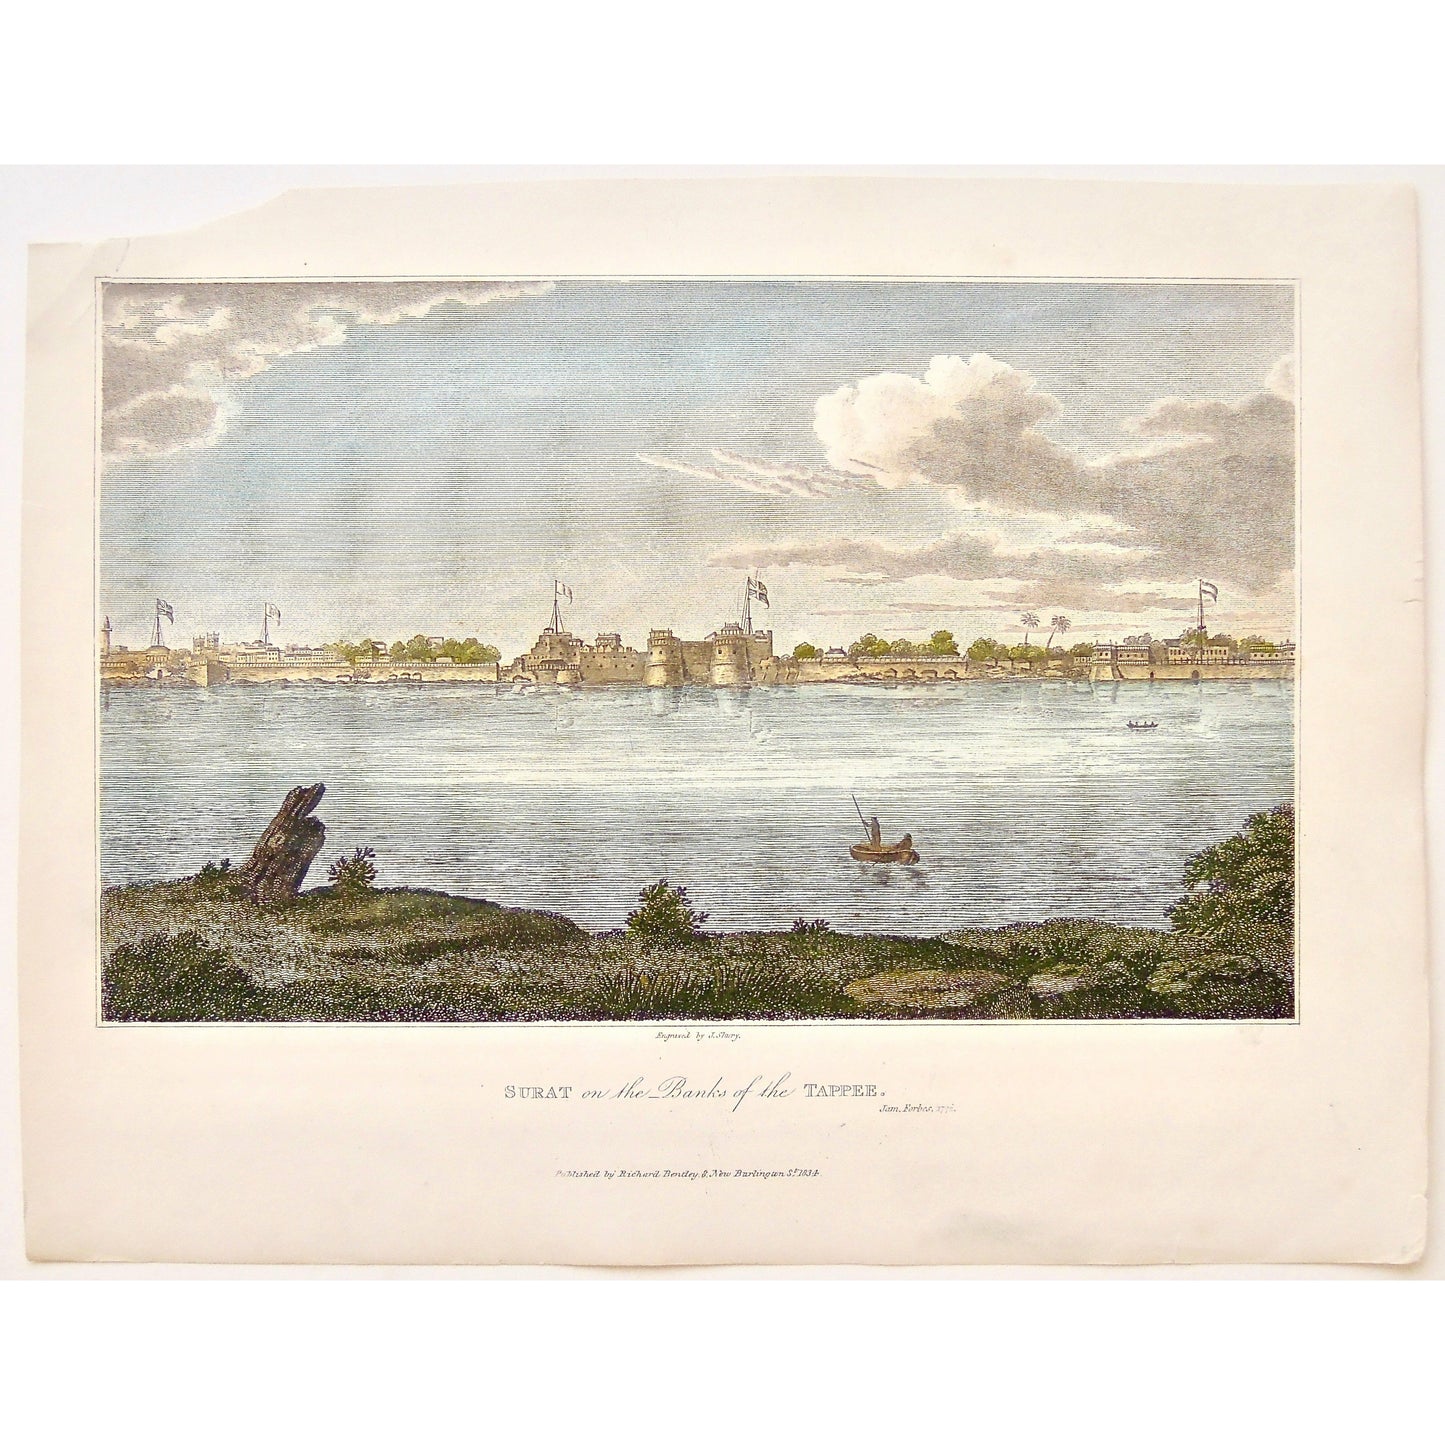 Surat, Surat on the banks of the Tappee, Bans of the Tappee, Tappee, Banks, Fort, Fortress, Flags, India, Indian Castle, Indian Fort, Indian Flags, on the water, James Forbes, Forbes, Eliza Rosée, Countess De Montalembert, Oriental Memoirs, Narrative of Seventeen Years Residence in India, Bentley, 8 New Burlington Street, London, Shury, Nichols & Son, 25 Parliament Street, 1772, 1834, Antique Print, Antique, Prints, Vintage Prints, Vintage, Collector, Collectable, Original, Unique, Rare Map, Rare, Rare boo